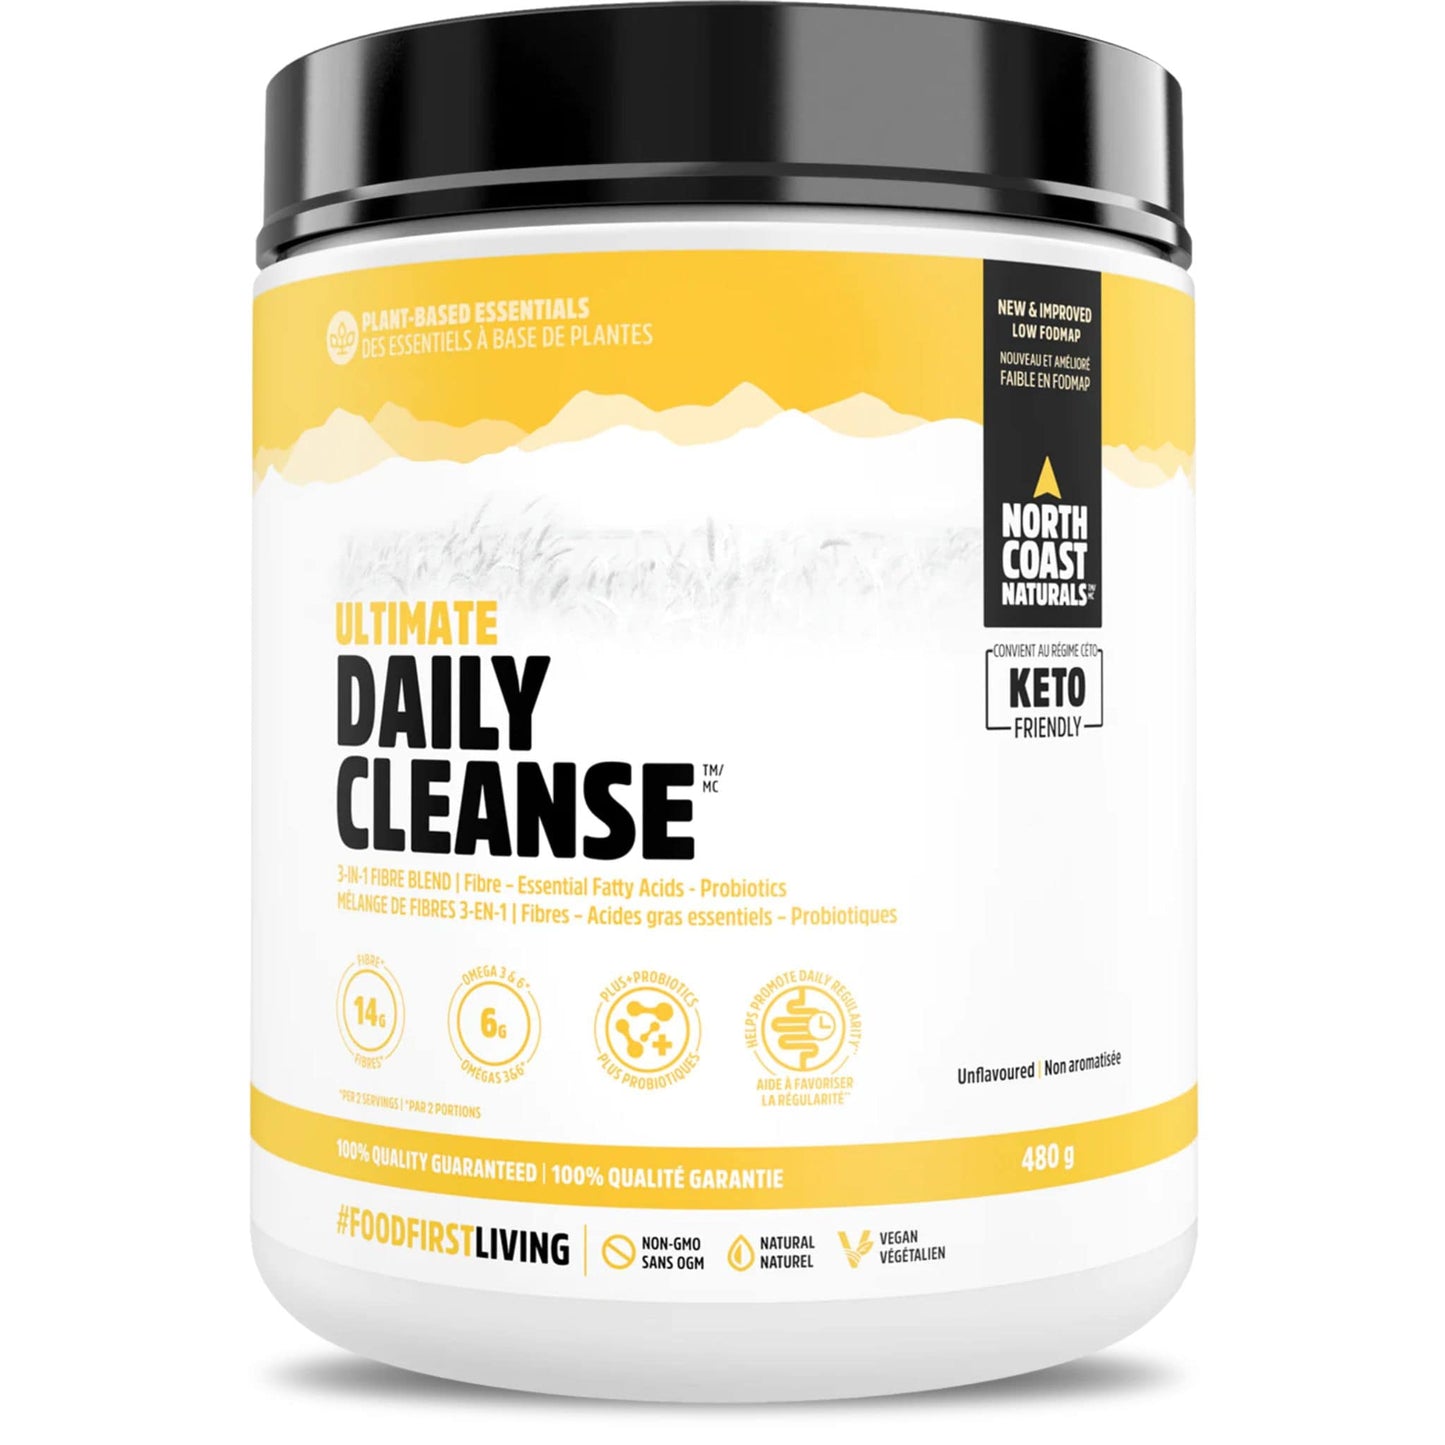 480g | North Coast Naturals Ultimate Daily Cleanse